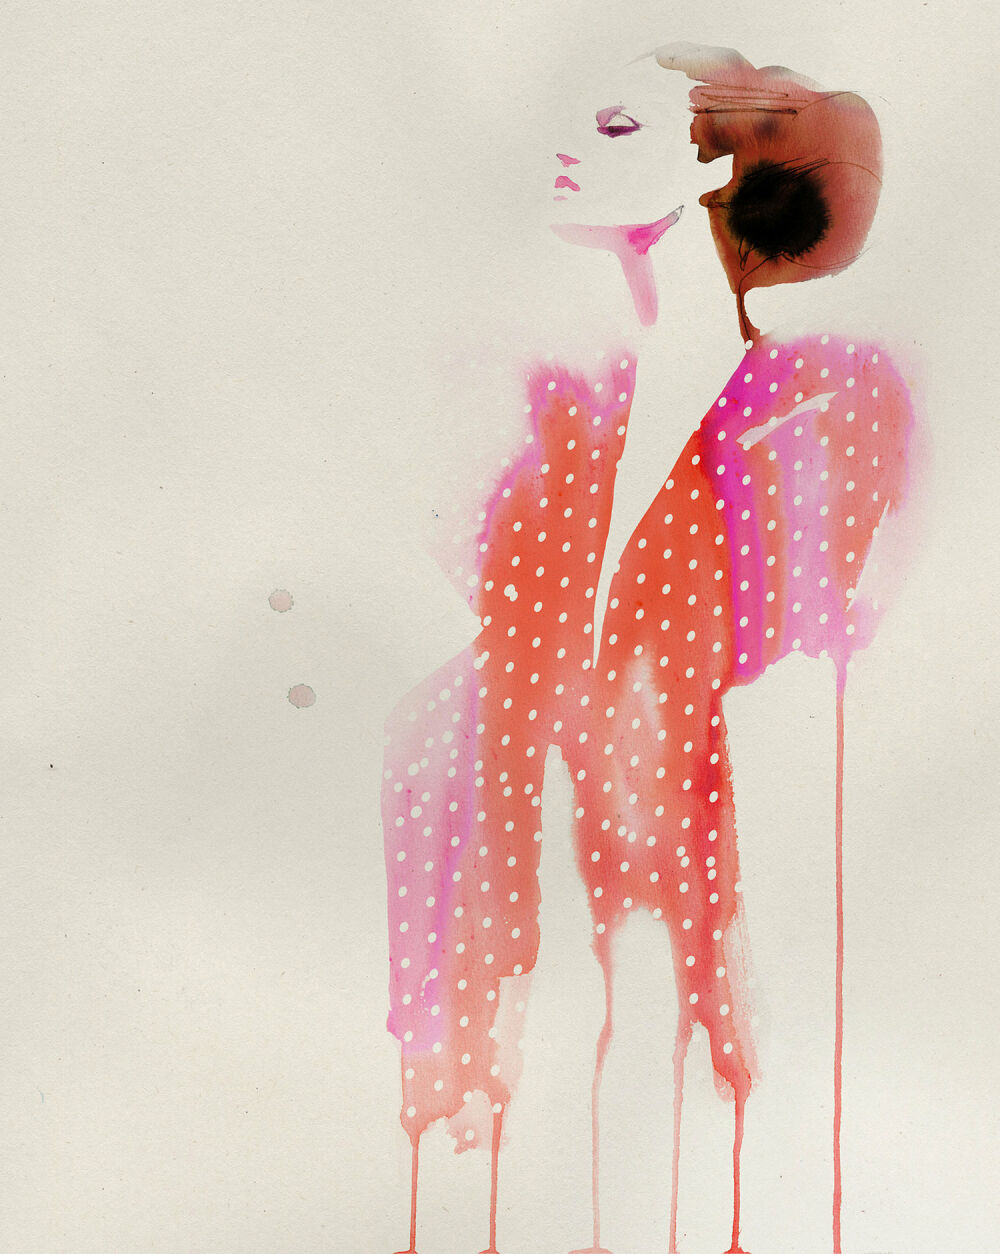 Illustration created by watercolor artist Stina Persson